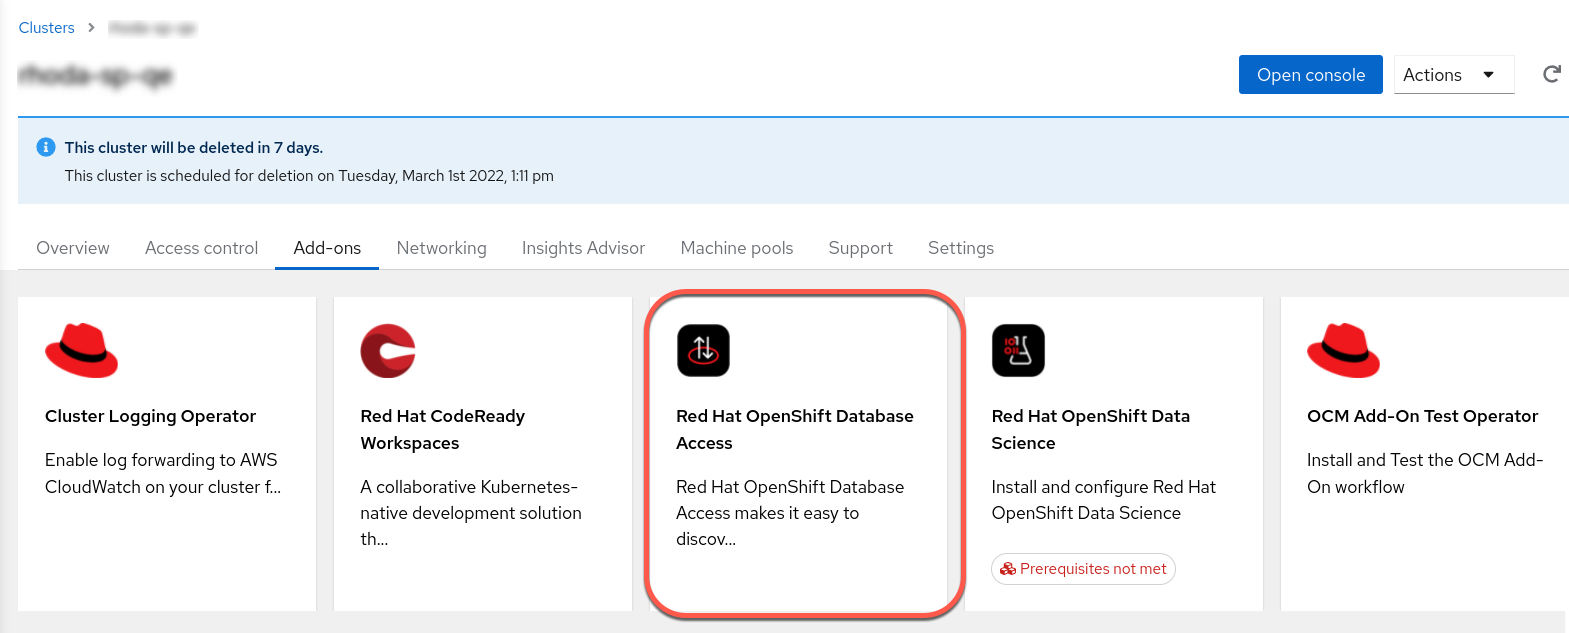 Selecting the Red Hat OpenShift Database Access tile